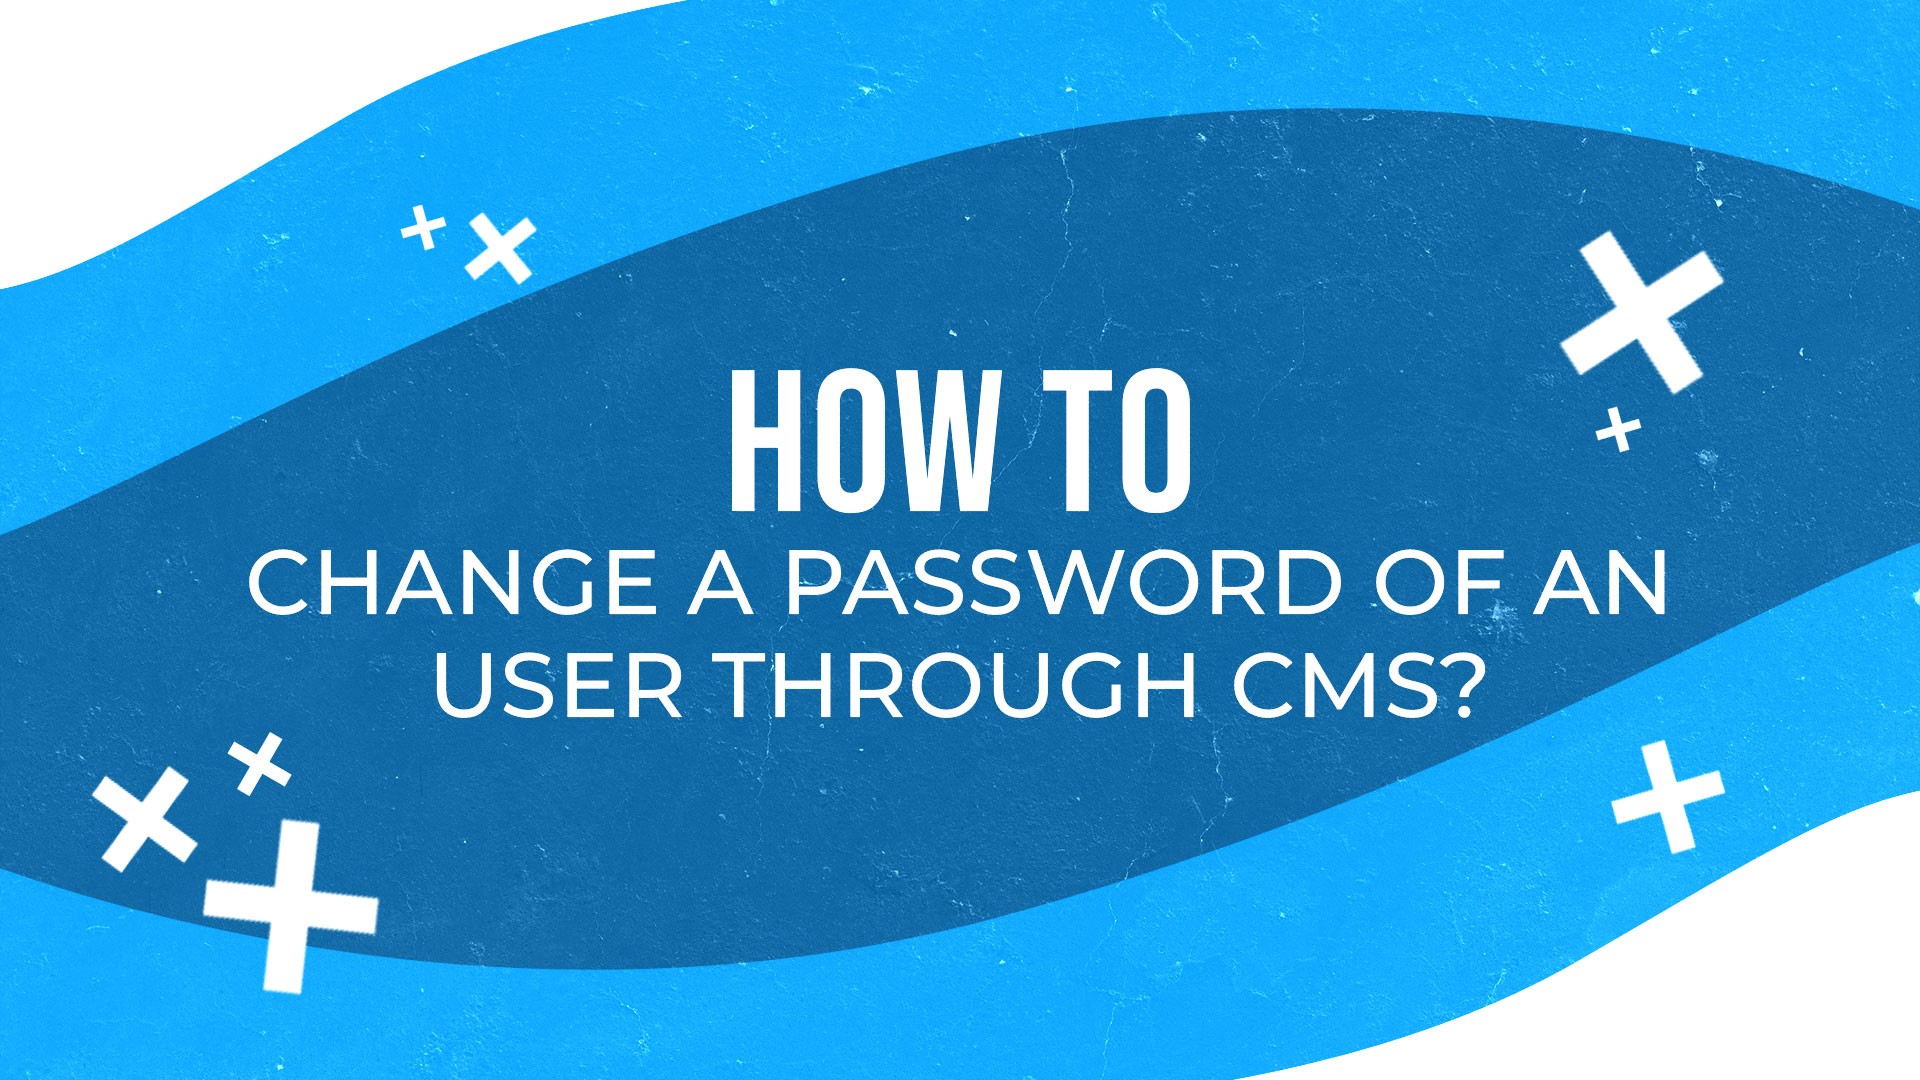 How to change a password of an user through CMS?